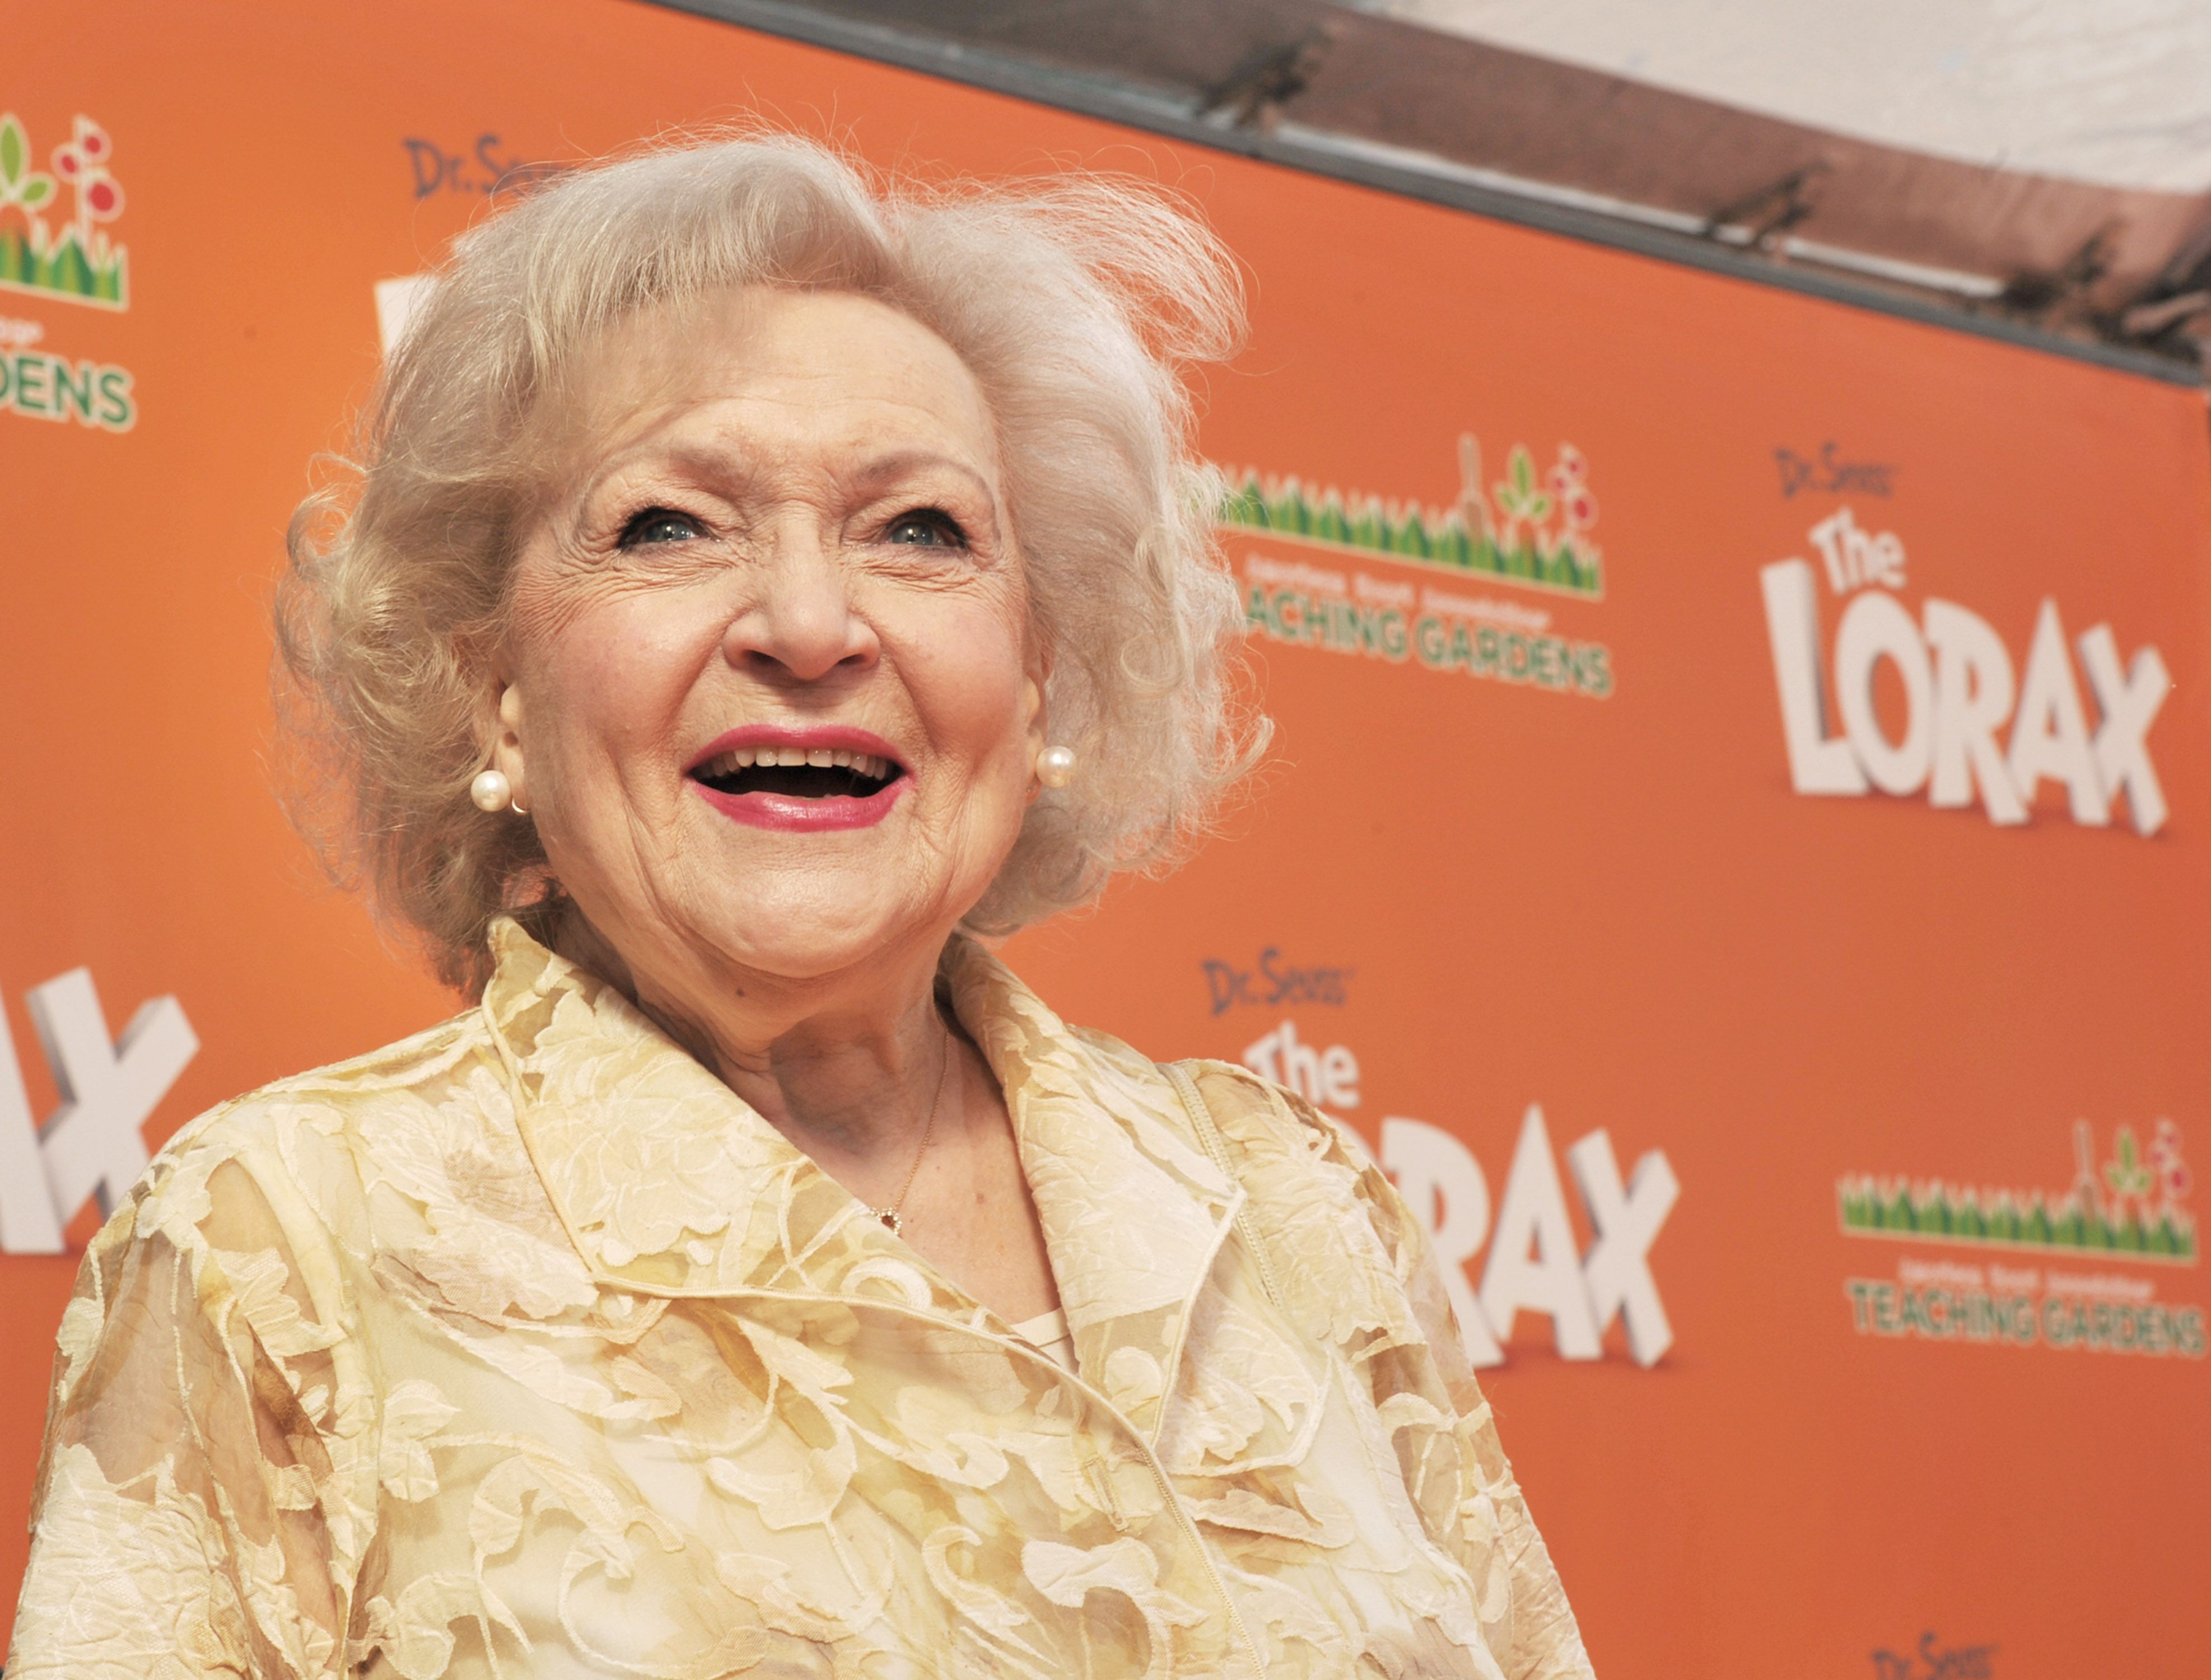 Betty White at the premiere of 3D-CG "Dr. Seuss' The Lorax" at Citywalk on February 19, 2012 | Photo: Getty Images